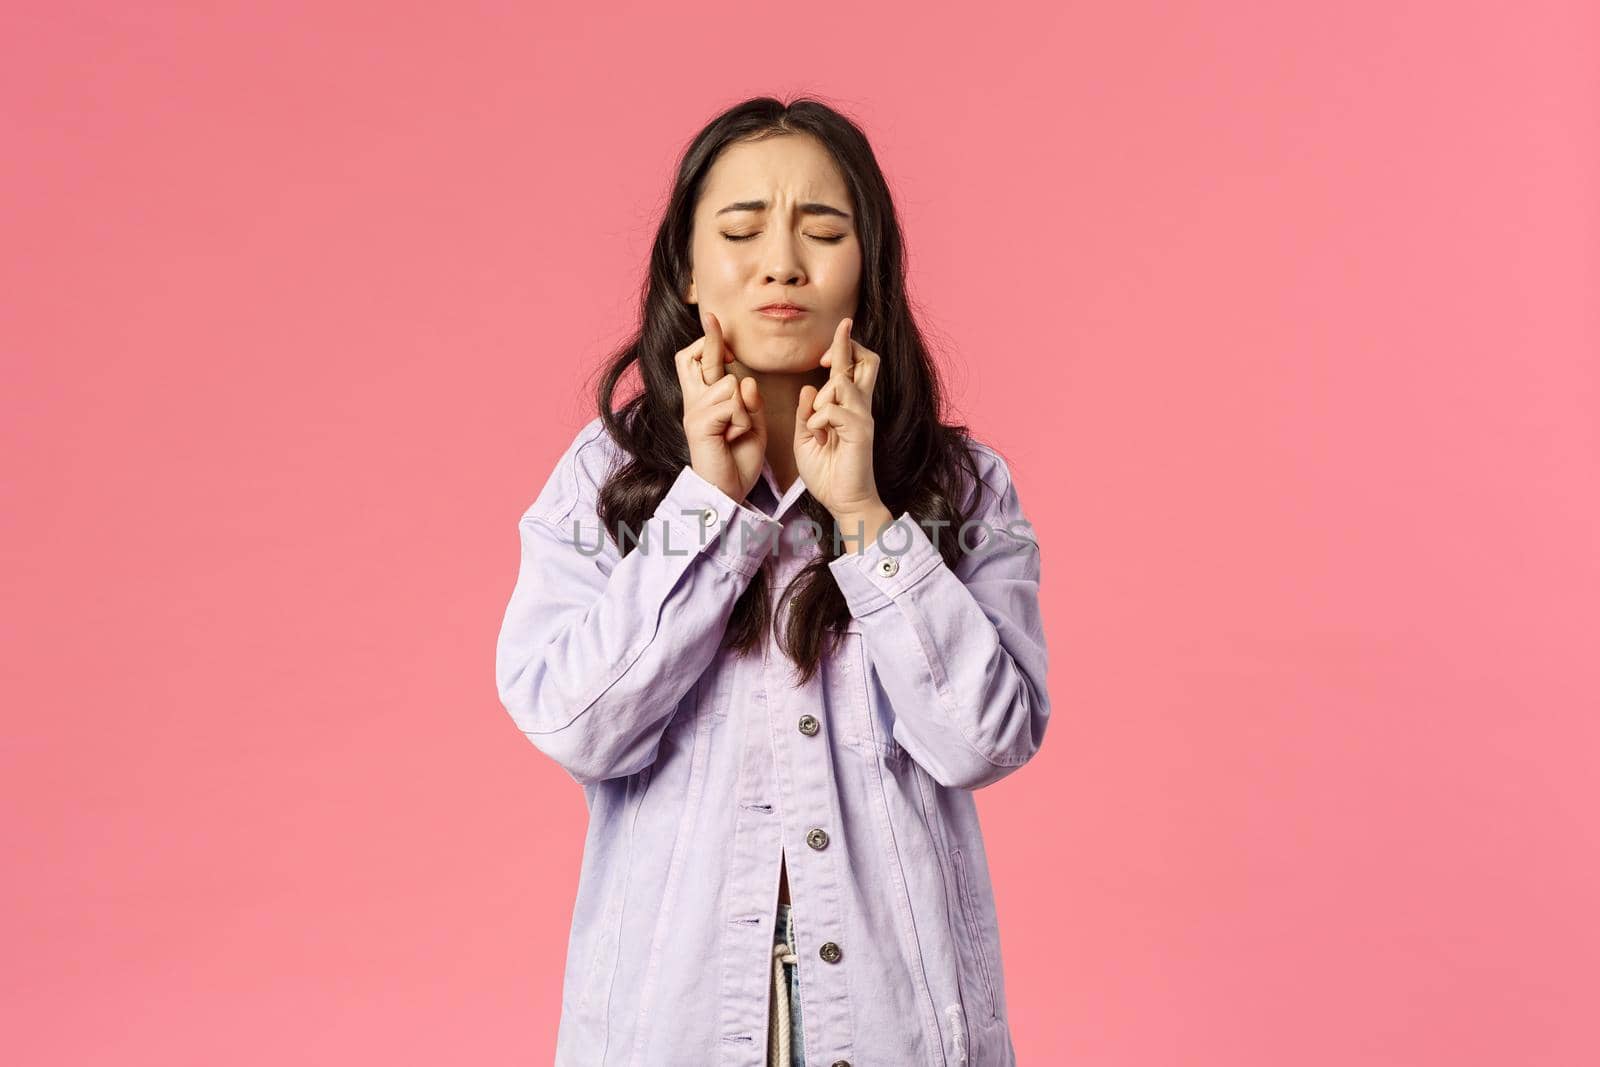 Portrait of woman desperately wants her dream to come true, cross fingers and close eyes, pouting pleading, praying god wish fulfill, standing pink background anticipate miracle happen with hope.